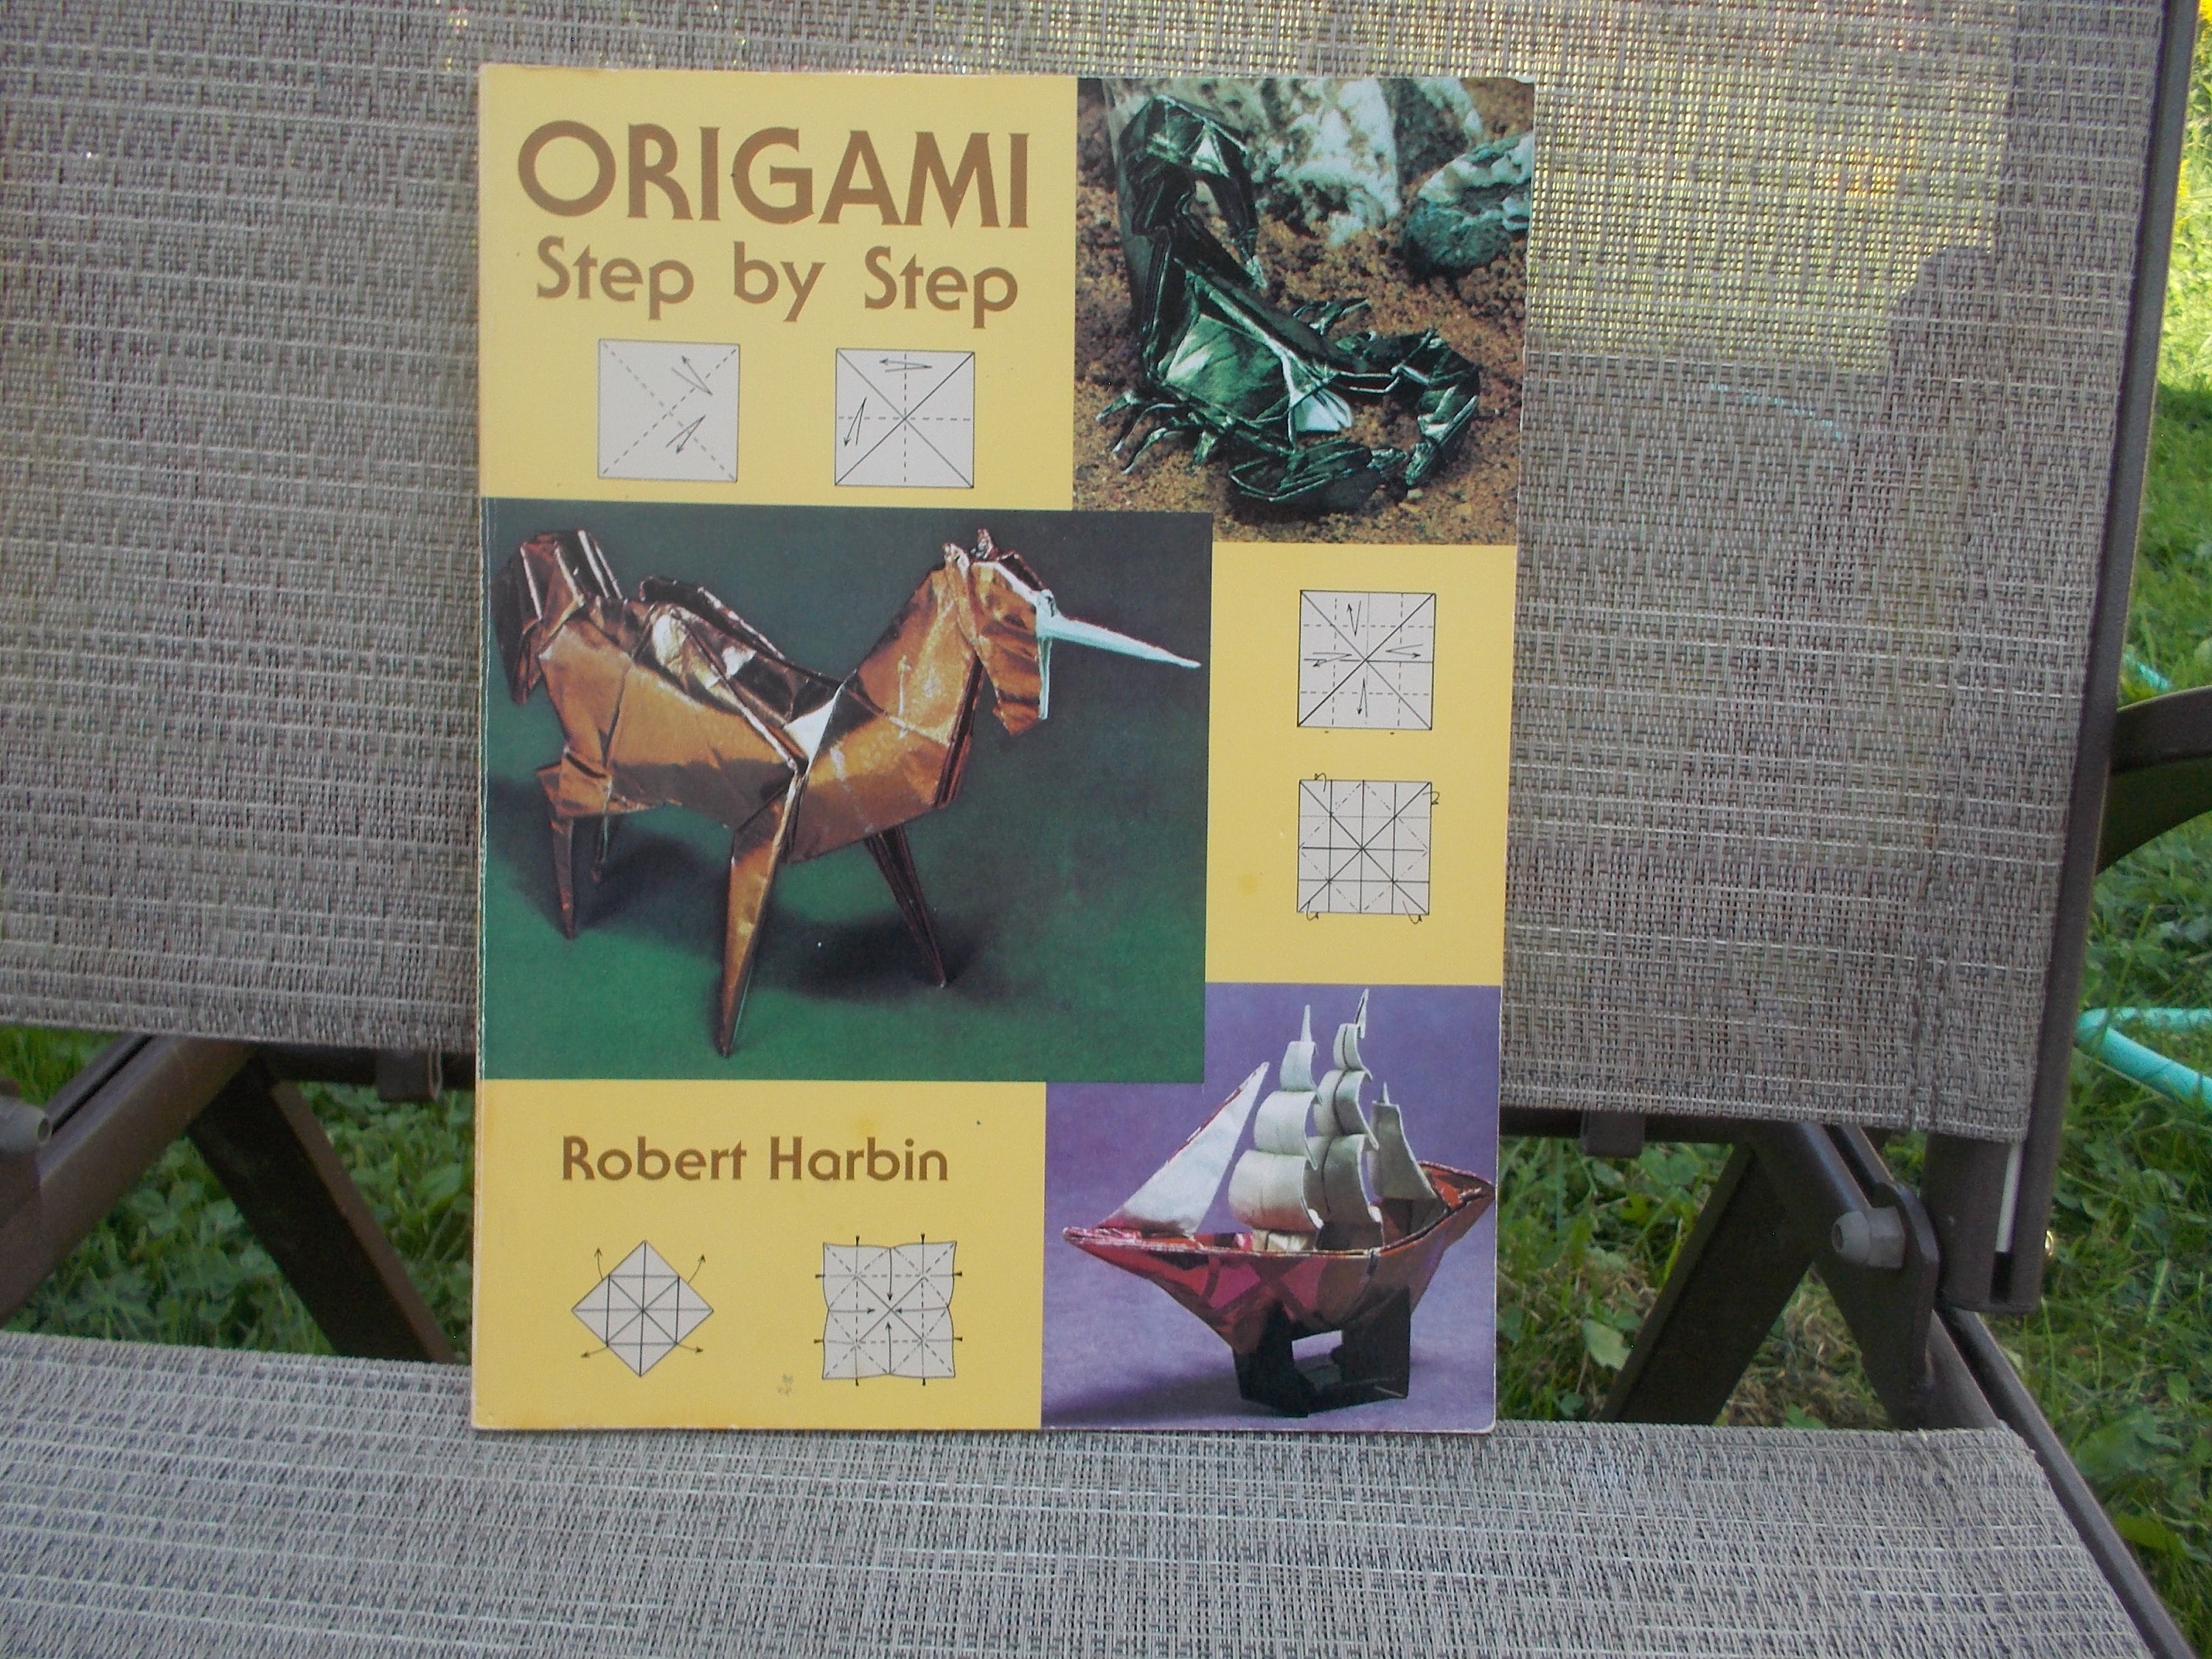 Origami Book One, Japanese Paper Folding Book, by Florence Sakade